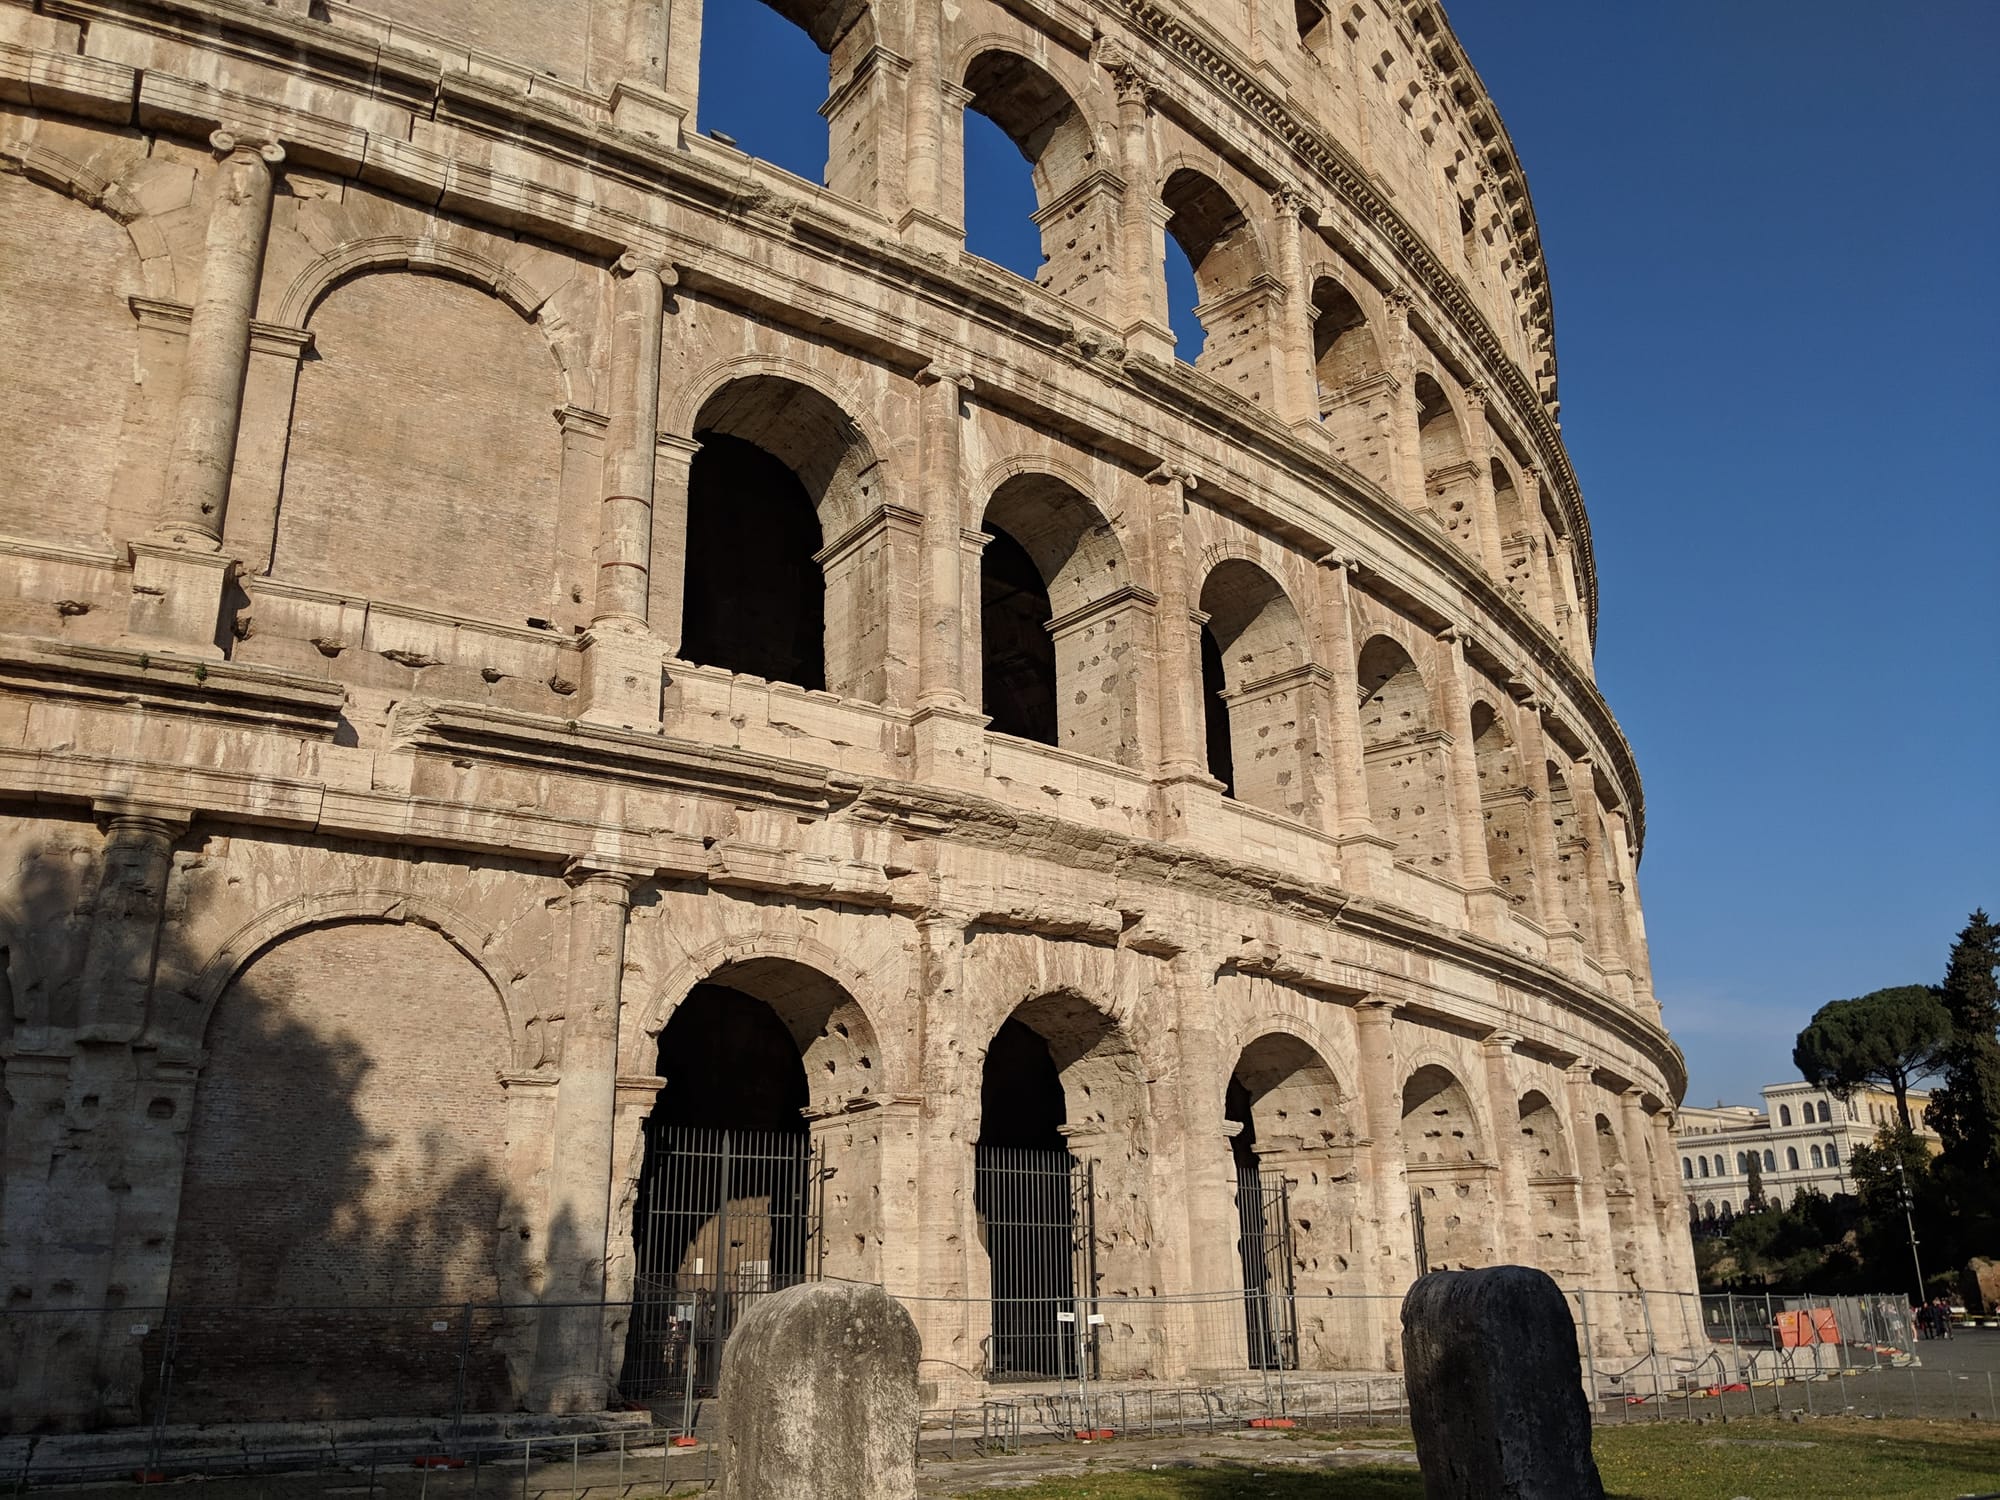 How can you NOT be awed by the Colosseum?